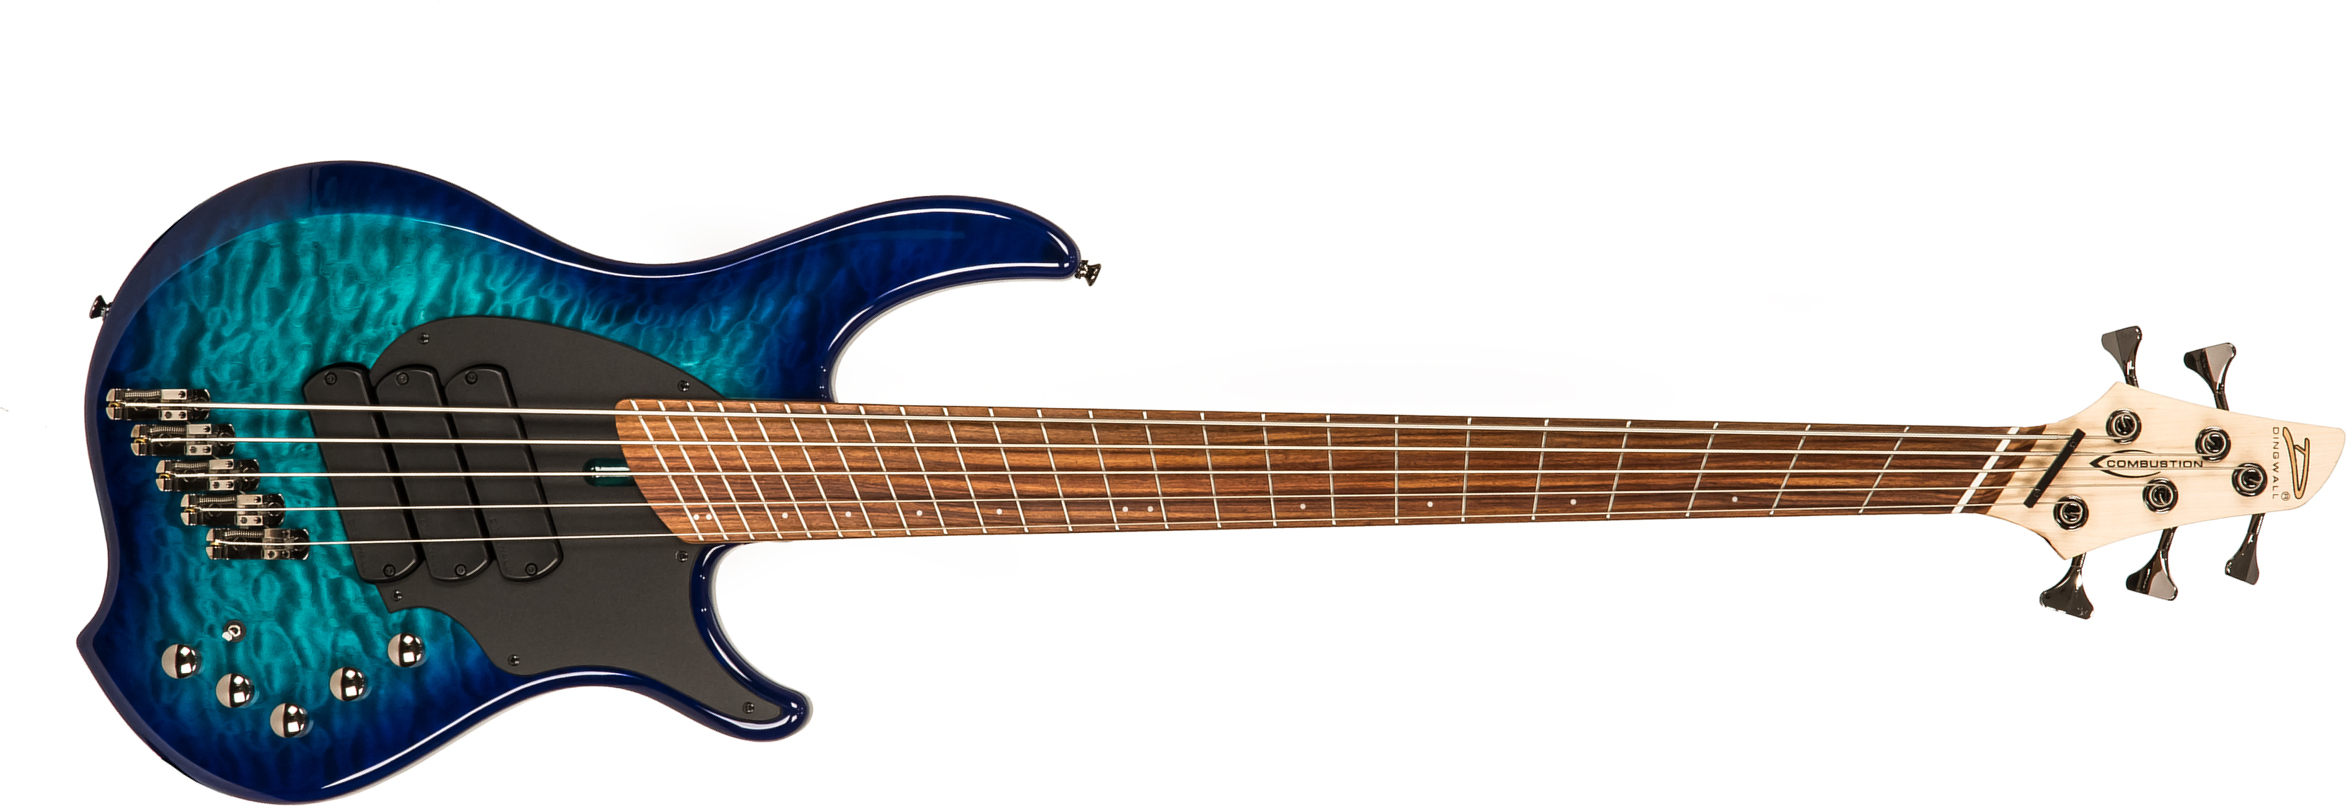 Dingwall Combustion 5 3-pickups Pf +housse - Whalepool Burst - Solid body electric bass - Main picture